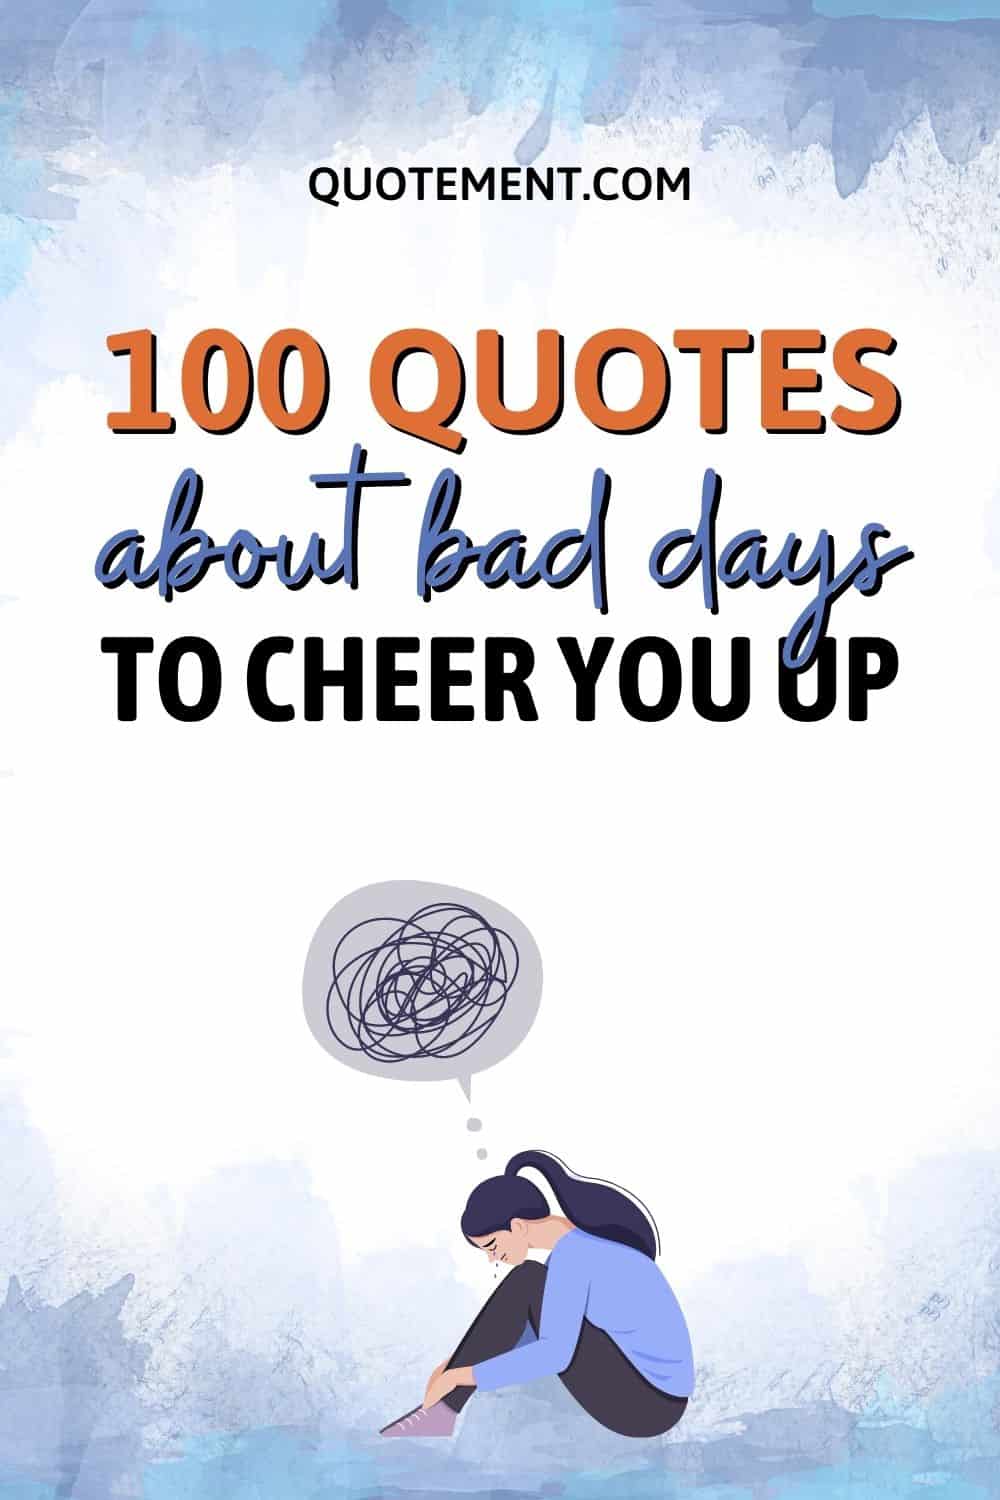 100 Wise Quotes About Bad Days To Help You Stay Positive
